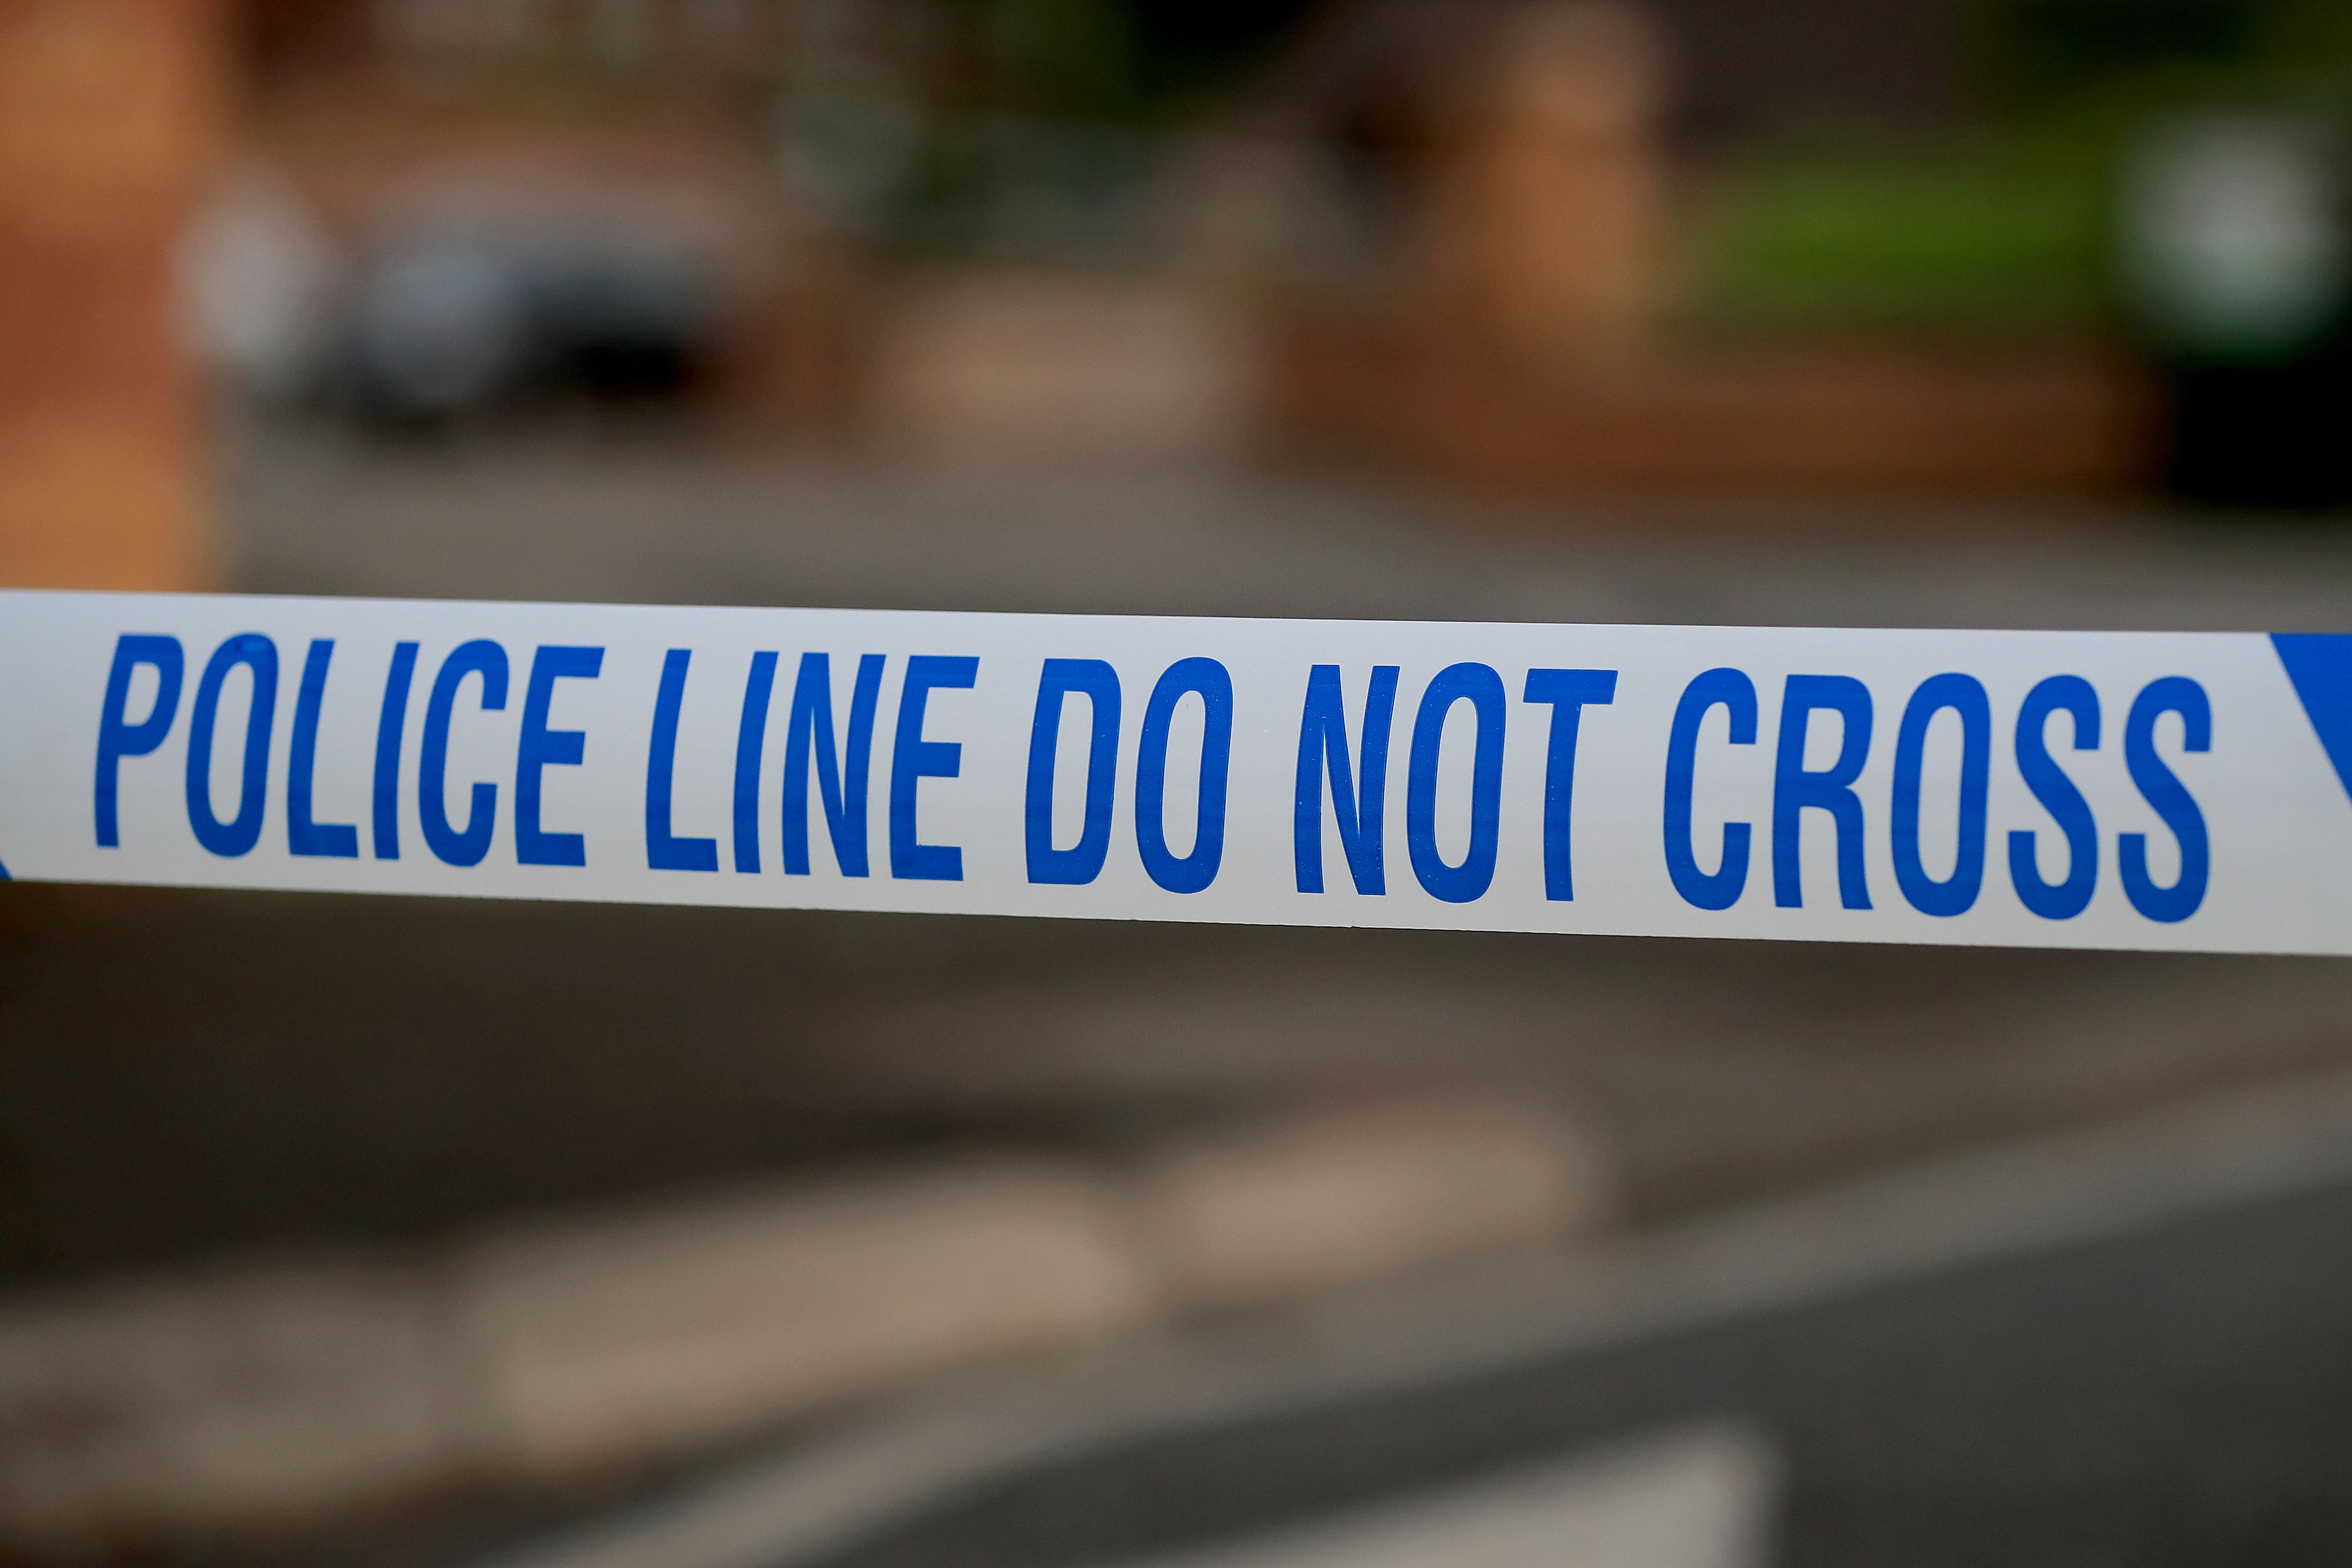 A man has been arrested after an 11-year-old boy suffered ‘life changing injuries’ on a shooting trip